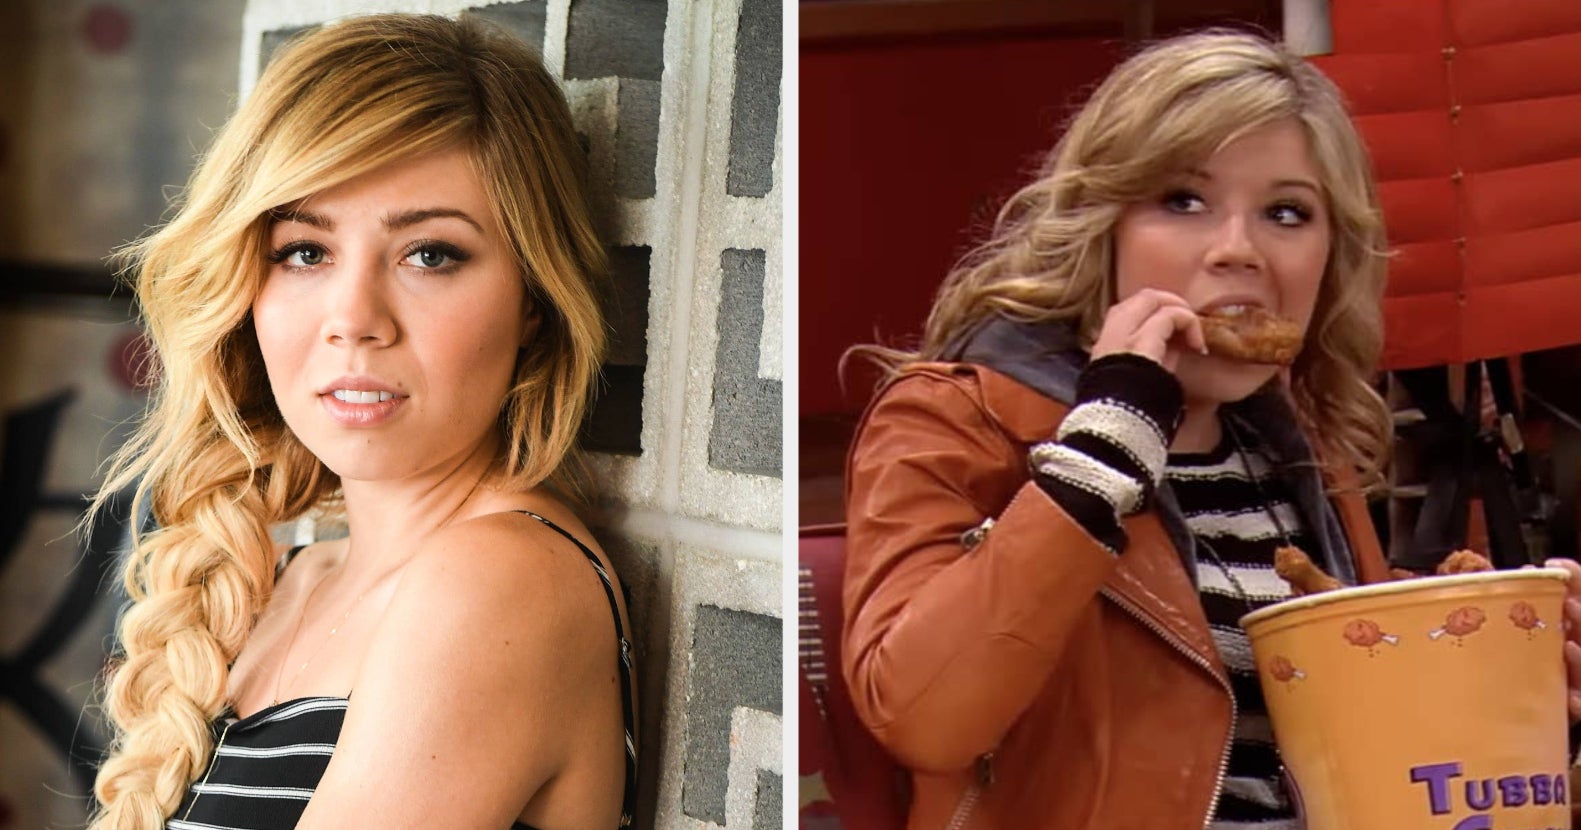 Jennette Mccurdy Creampie Porn - Jennette McCurdy Struggled With Food-Obsessed â€œiCarlyâ€ Character, Eating  Disorders